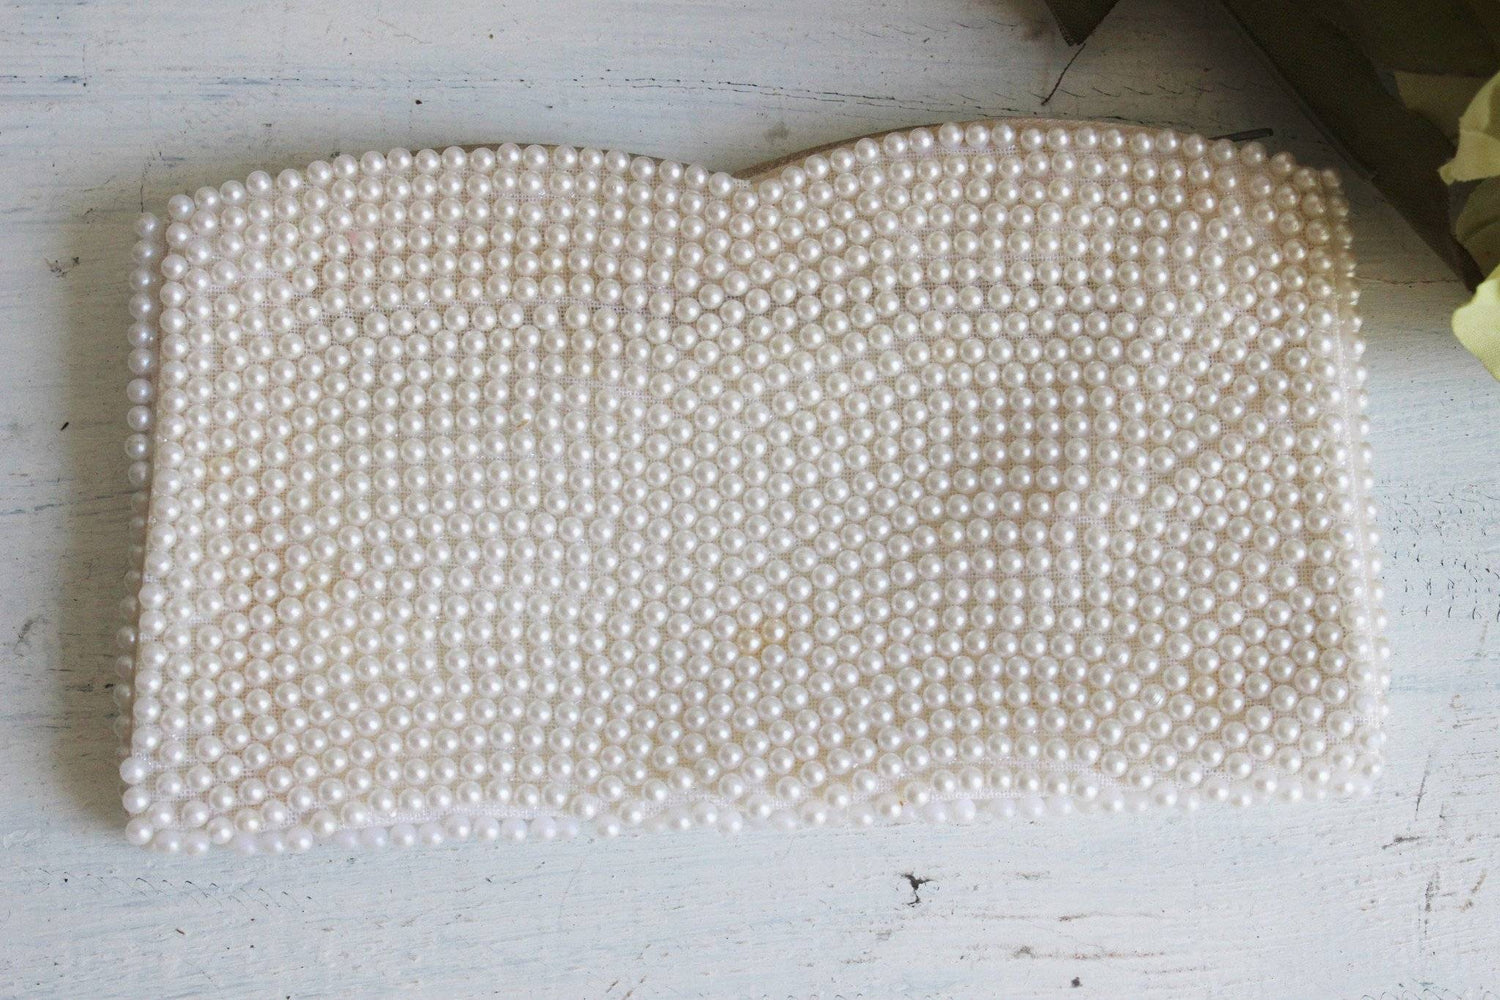 Vintage 1950s Faux Pearl Beaded Clutch Purse, Bags by Susan